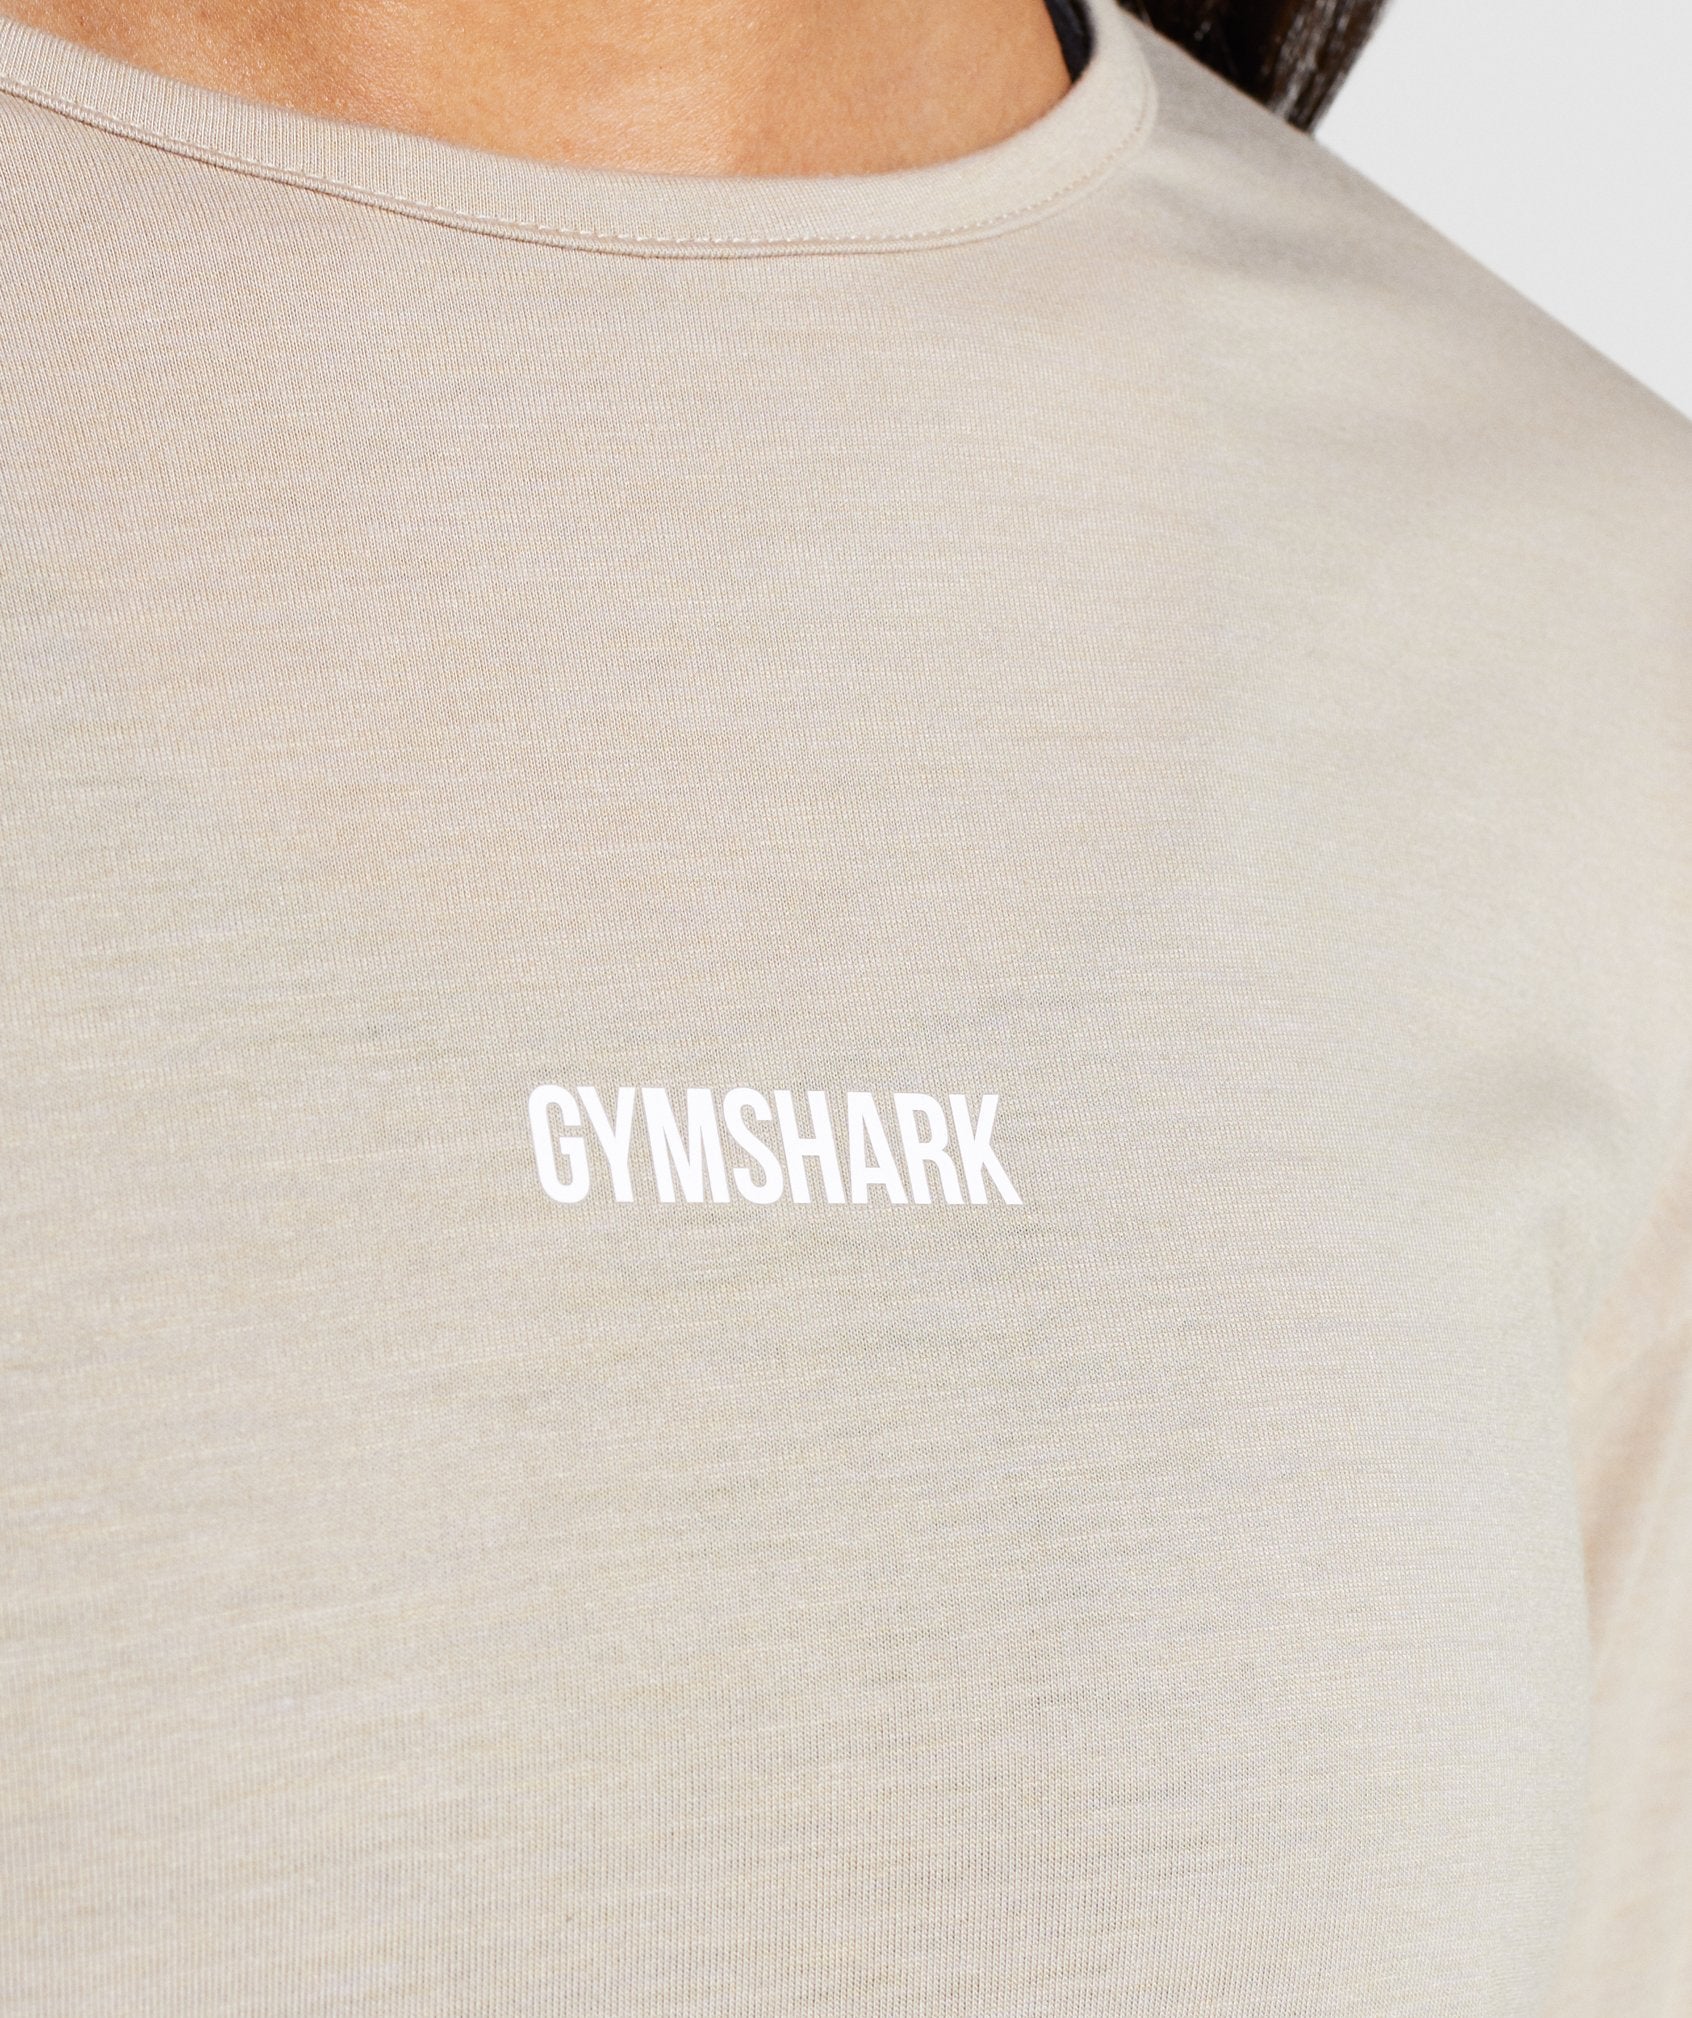 Ark Long Sleeve Top in Sand - view 5